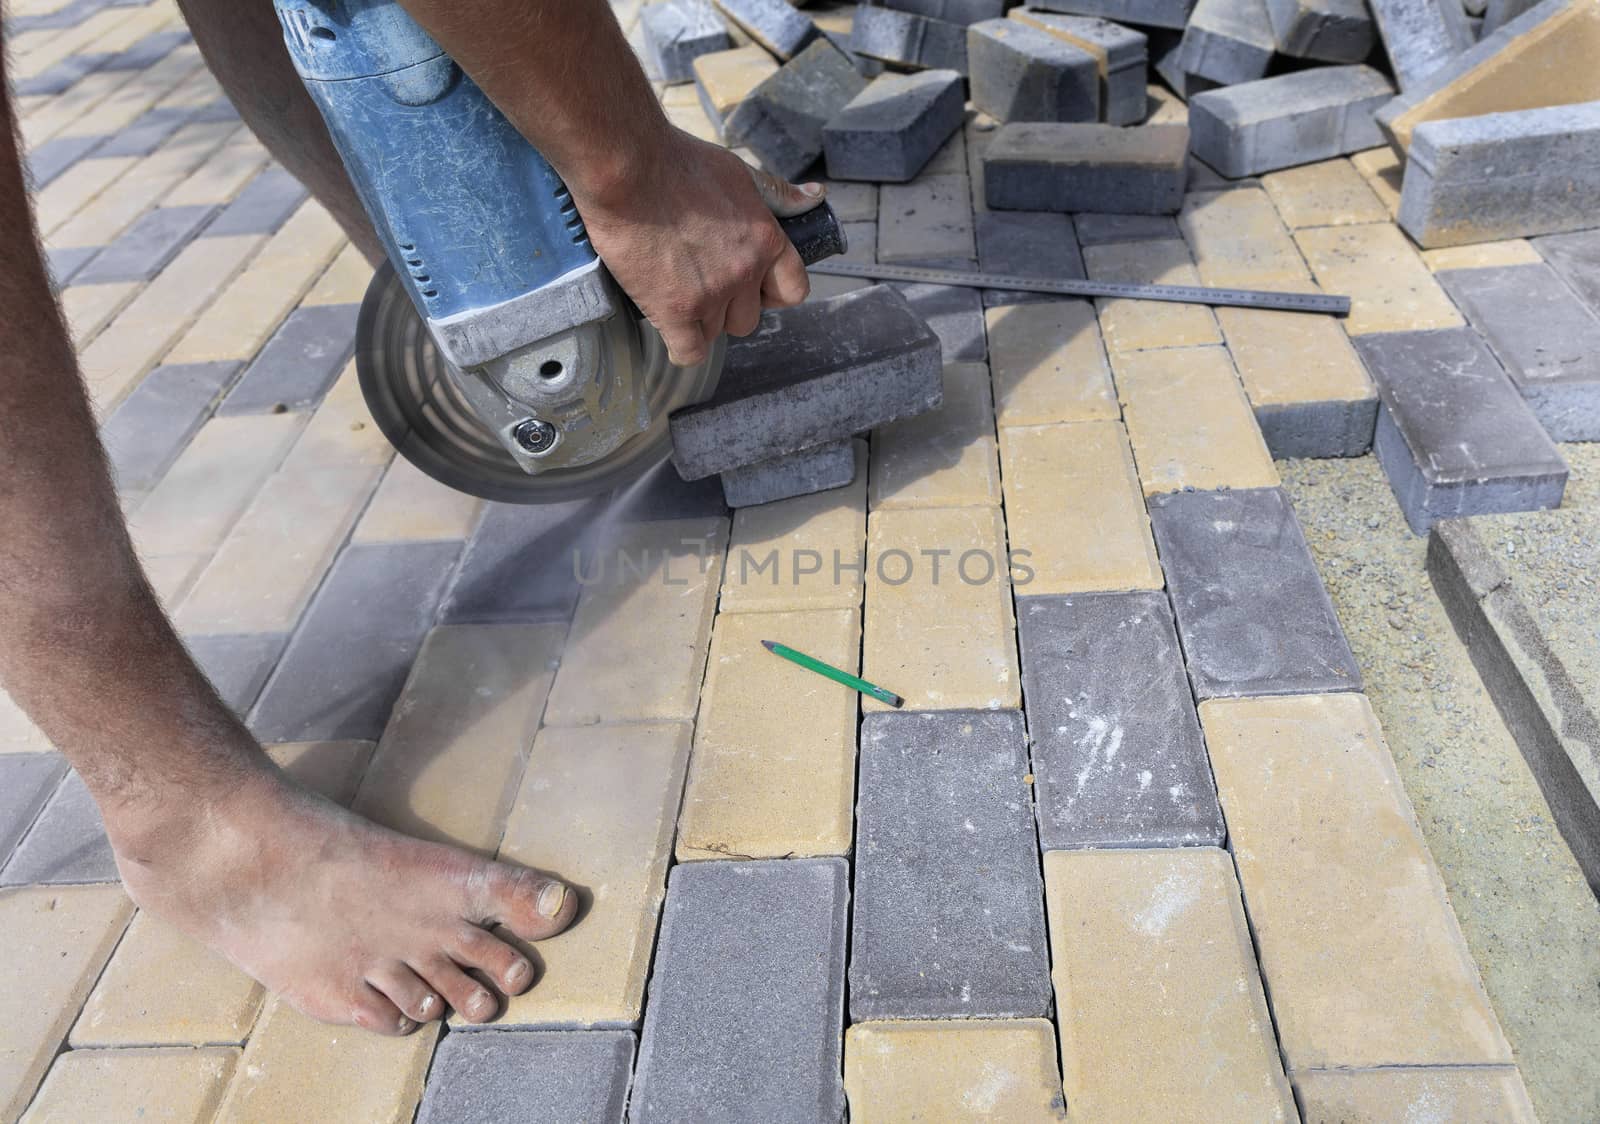 The worker cuts a bar of paving slabs for the final laying on the terrace on a city street at noon.